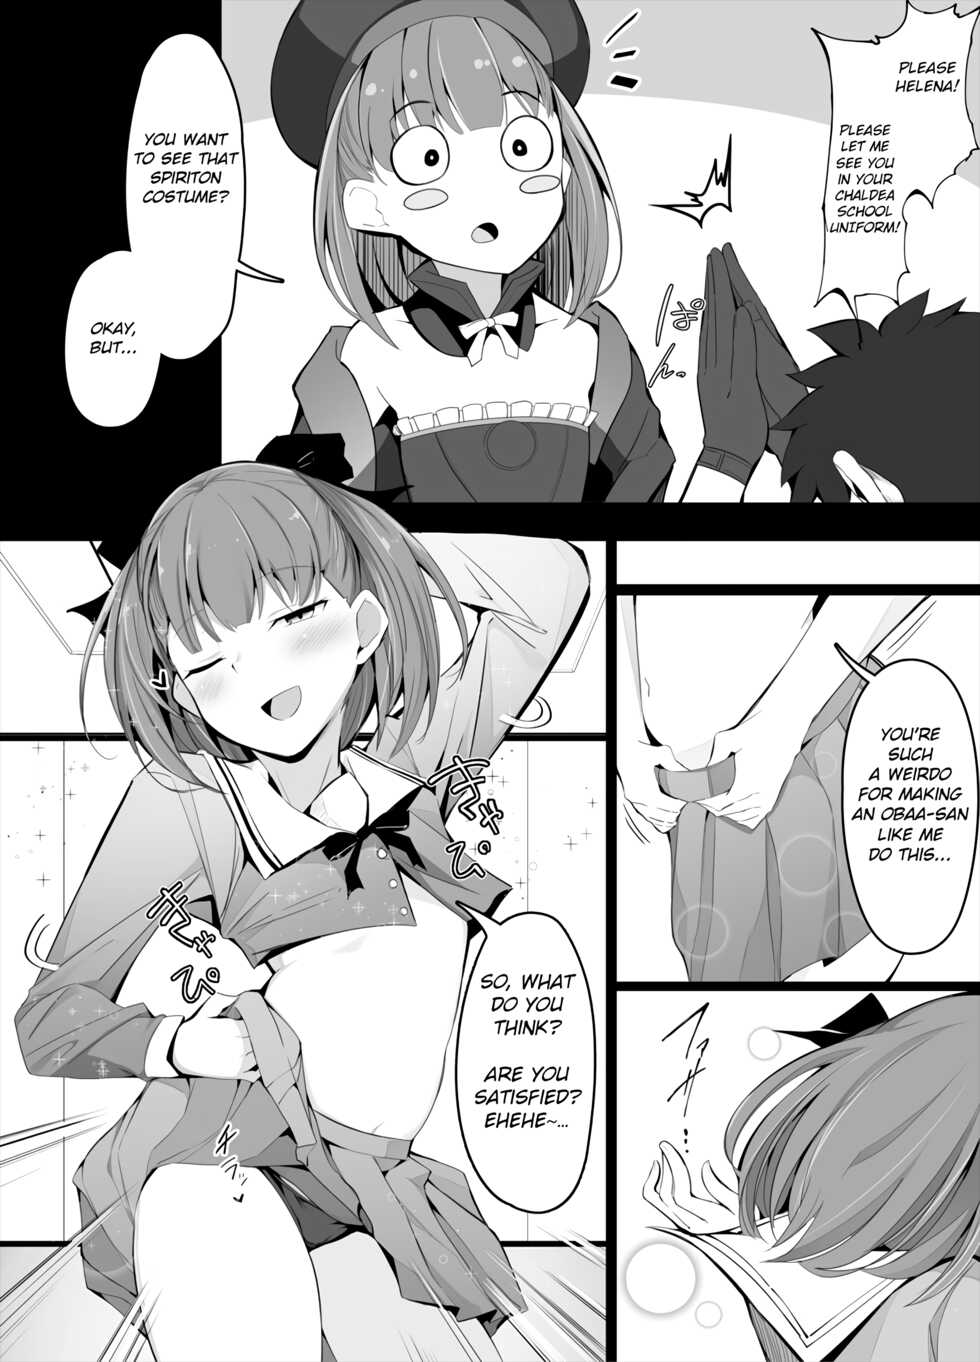 [Corundum] I Teased Helena Obaa-san and It Was Scarier Than I Thought! (Fate/Grand Order) [English] [Bingus Blongus] - Page 4